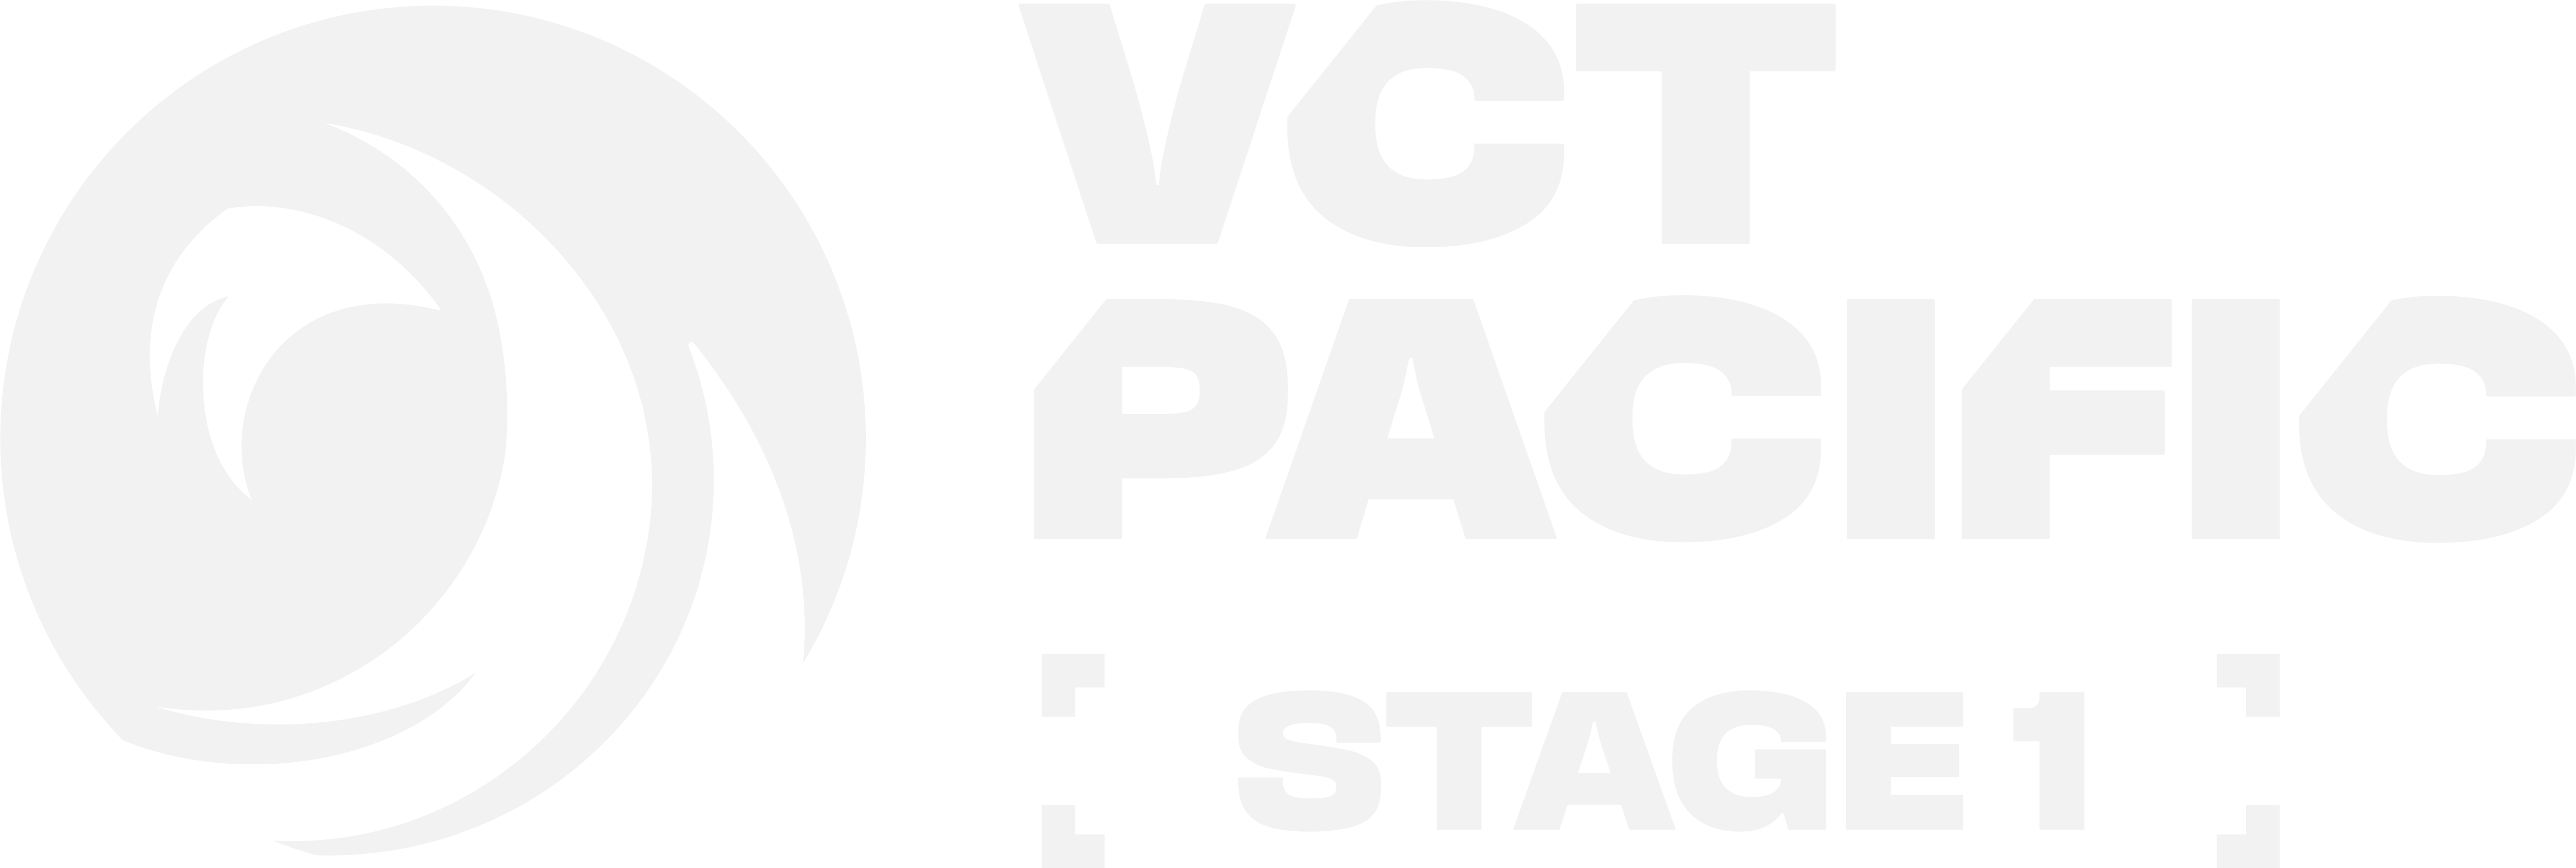 VCTSTAGE1.png__PID:d09a2451-c3cc-485e-94c1-86cf9375f17b